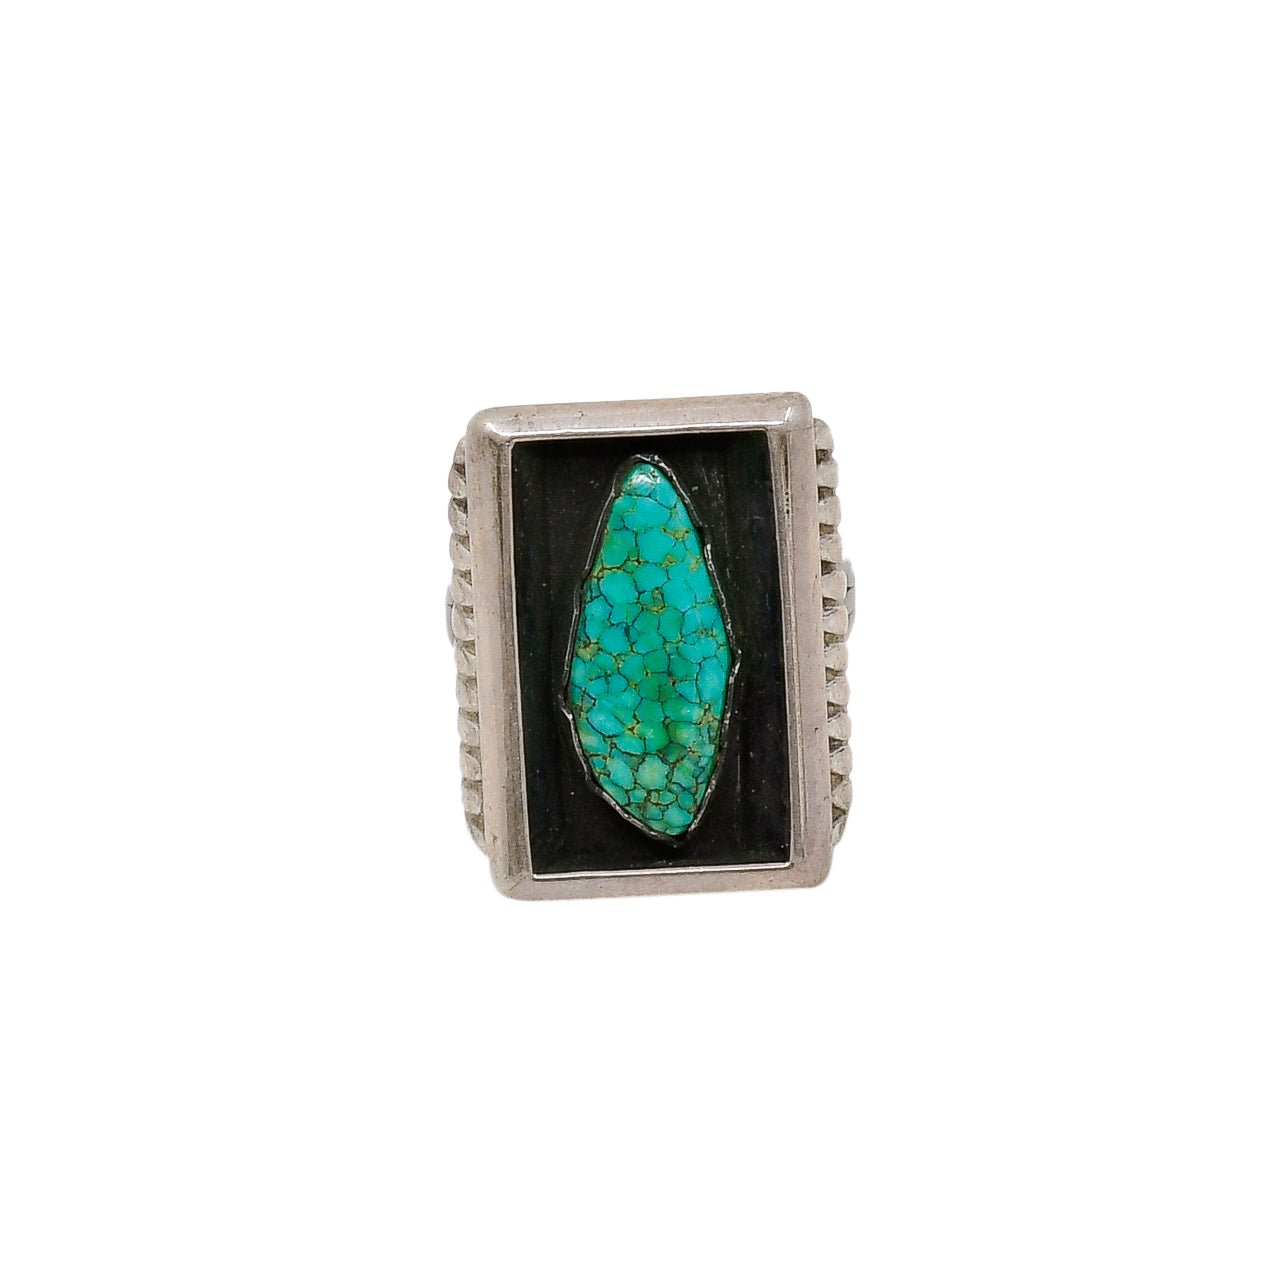 Vintage Natural Turquoise Ring With Shadow Box Setting - Turquoise & Tufa